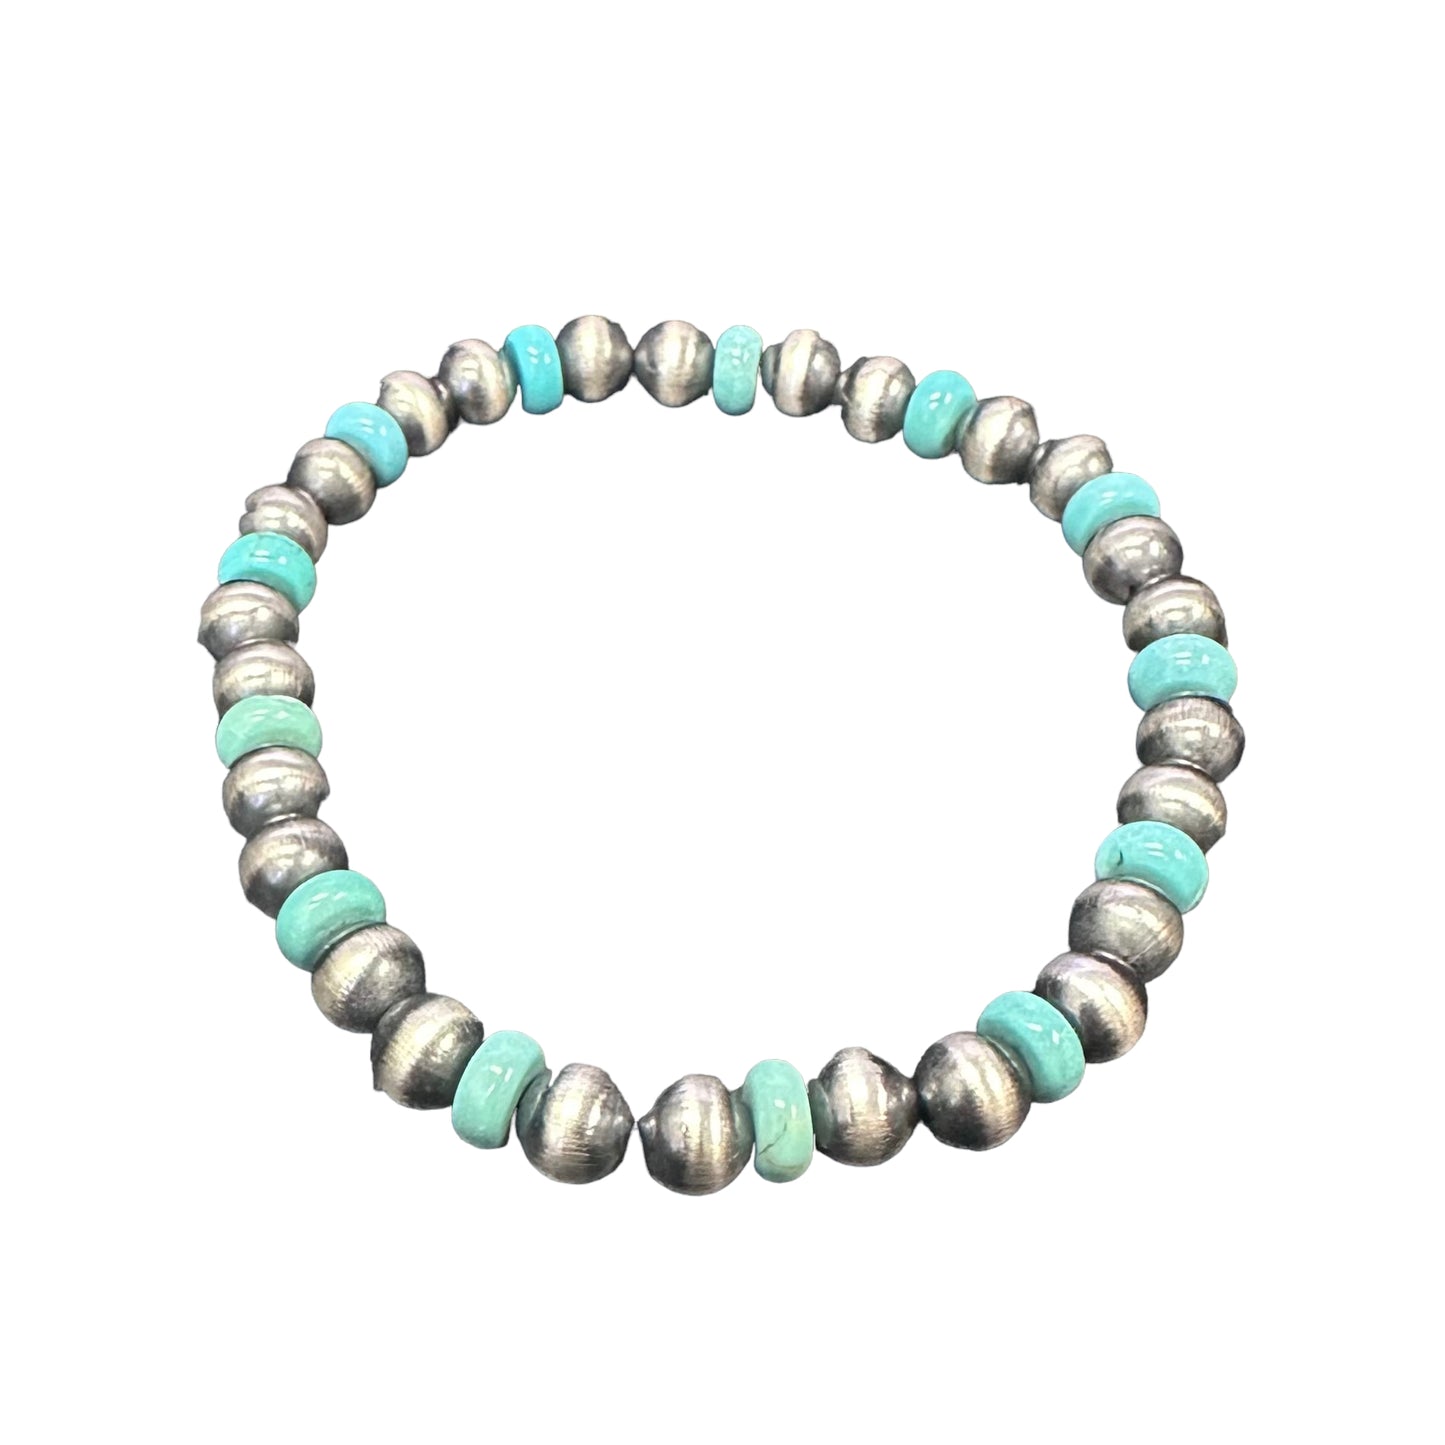 Turquoise Navajo Pearl 6mm Oxidize Bead Stretch Bracelet Sterling Silver